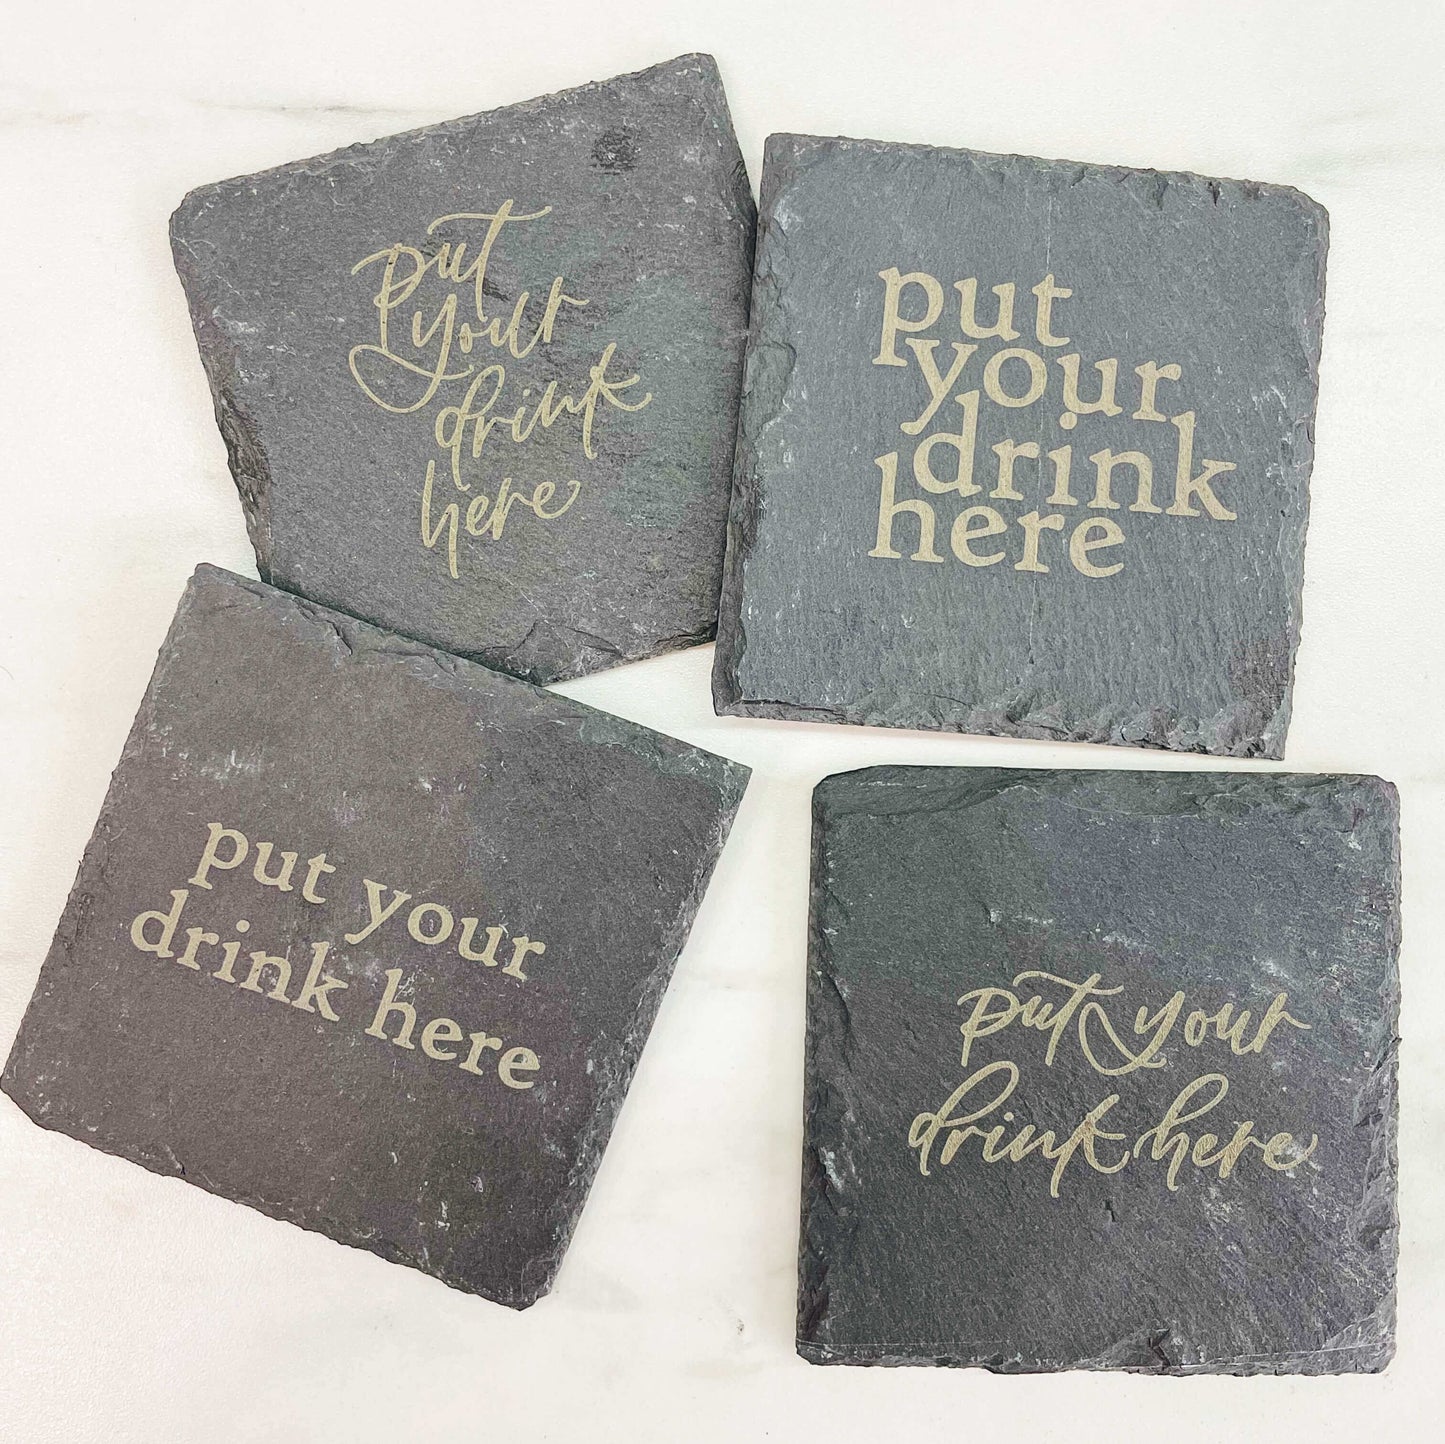 Engraved Slate Coasters - “put your drink here” - Set of 4